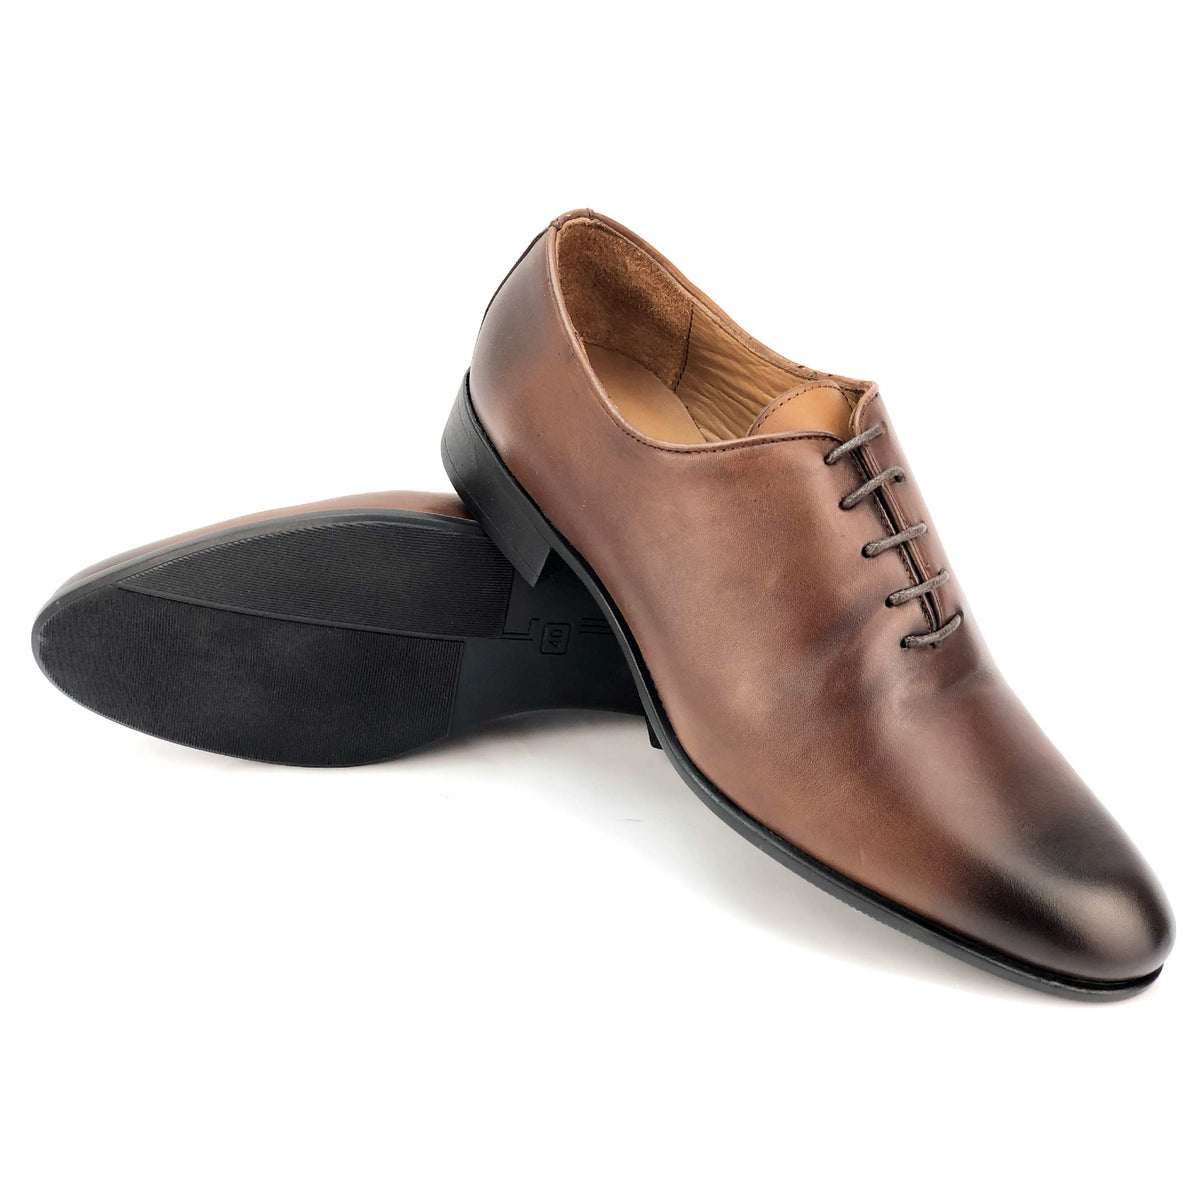 CH587-015 - Chaussure cuir Tabac - deluxe-maroc